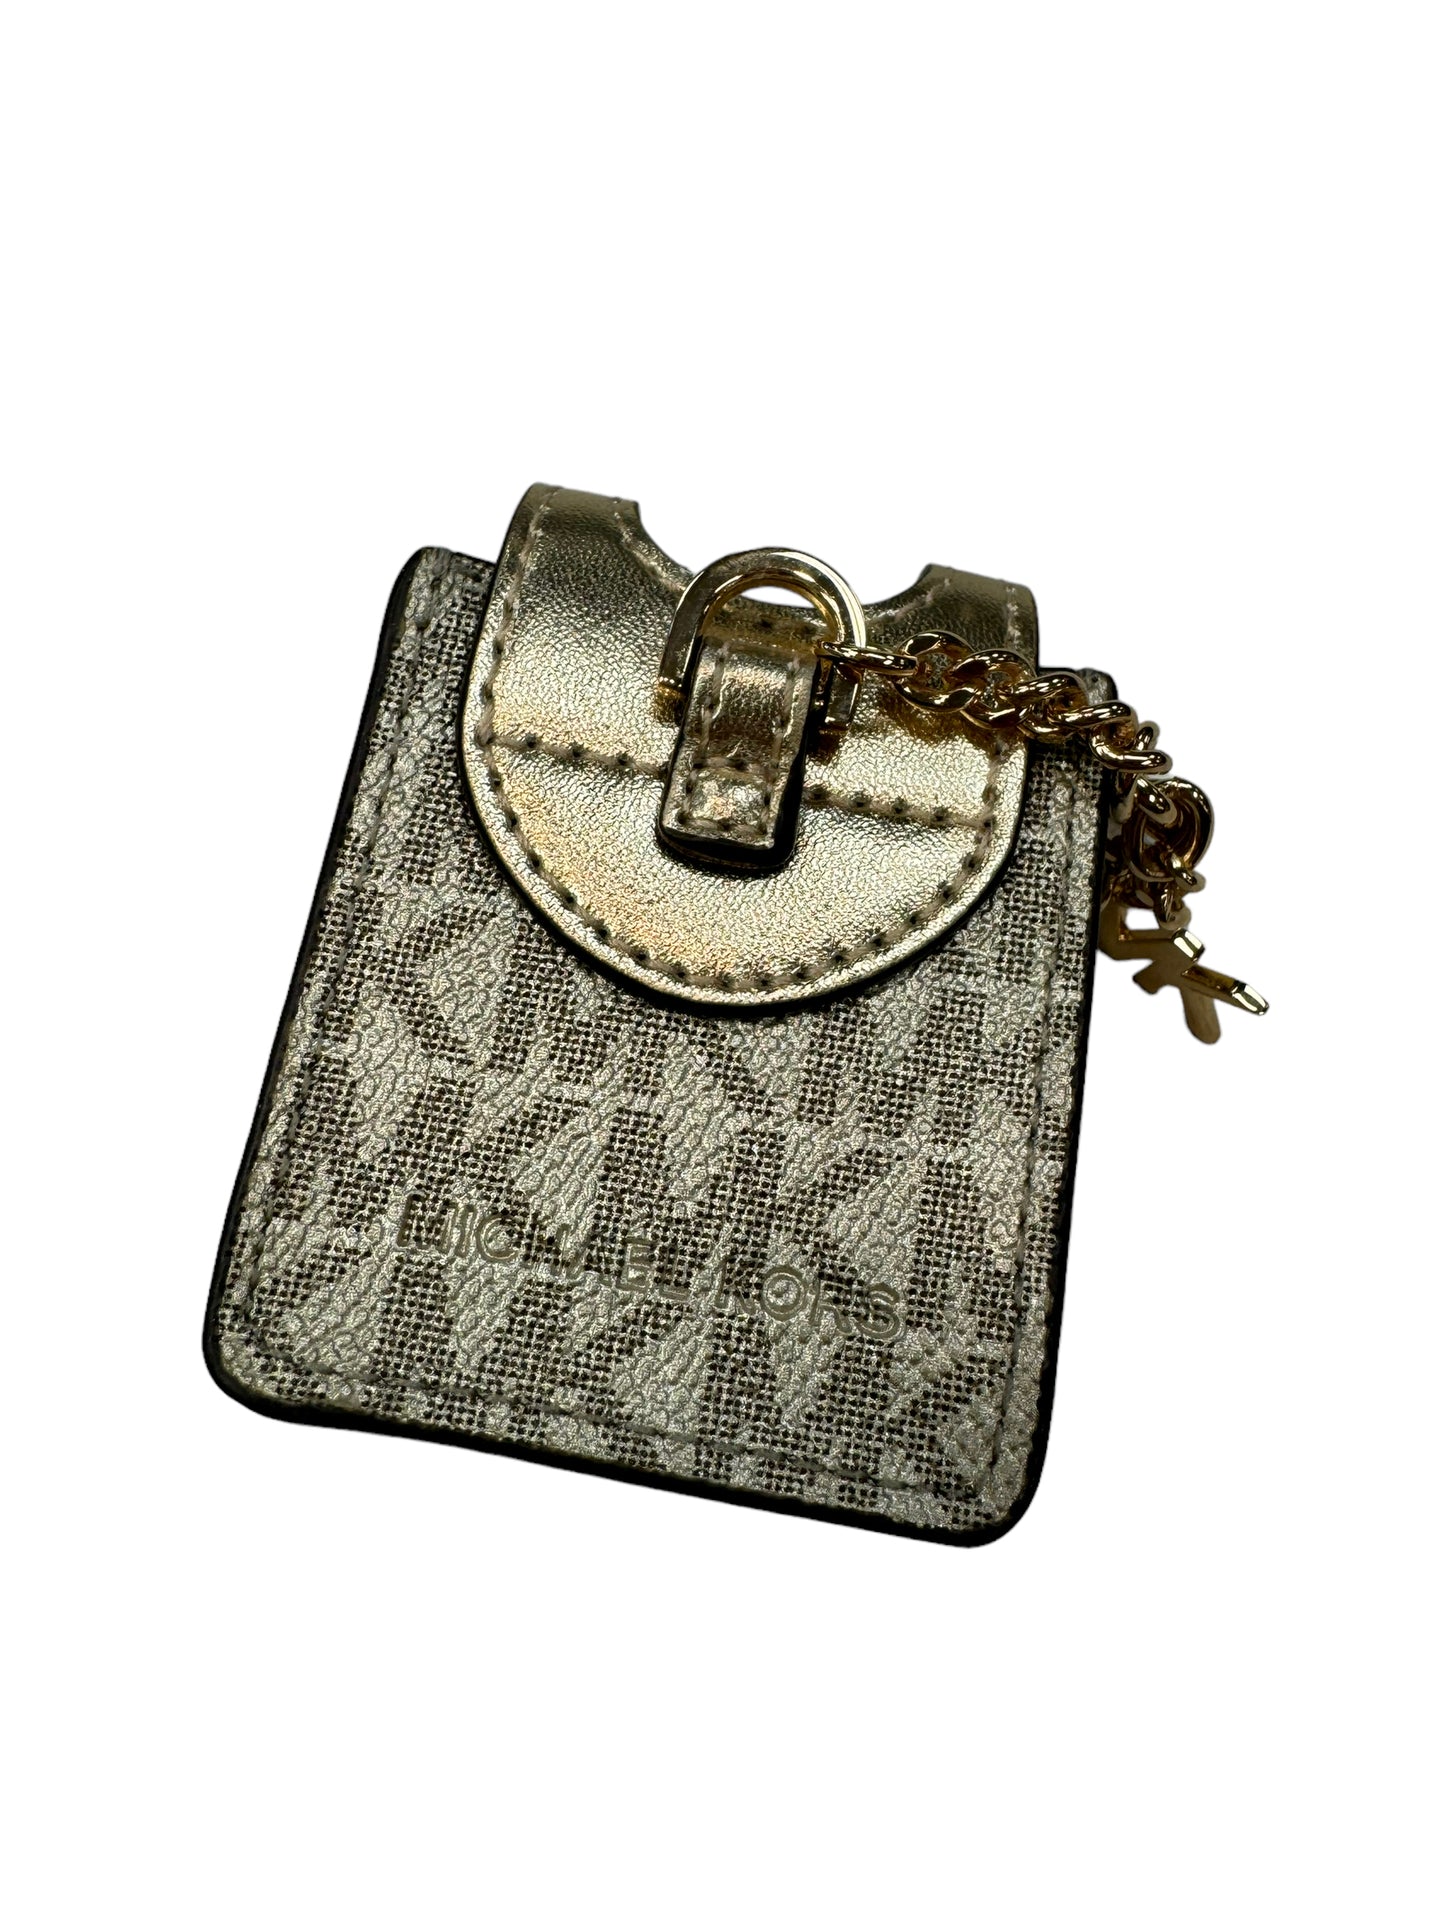 Accessory Designer Tag By Michael Kors